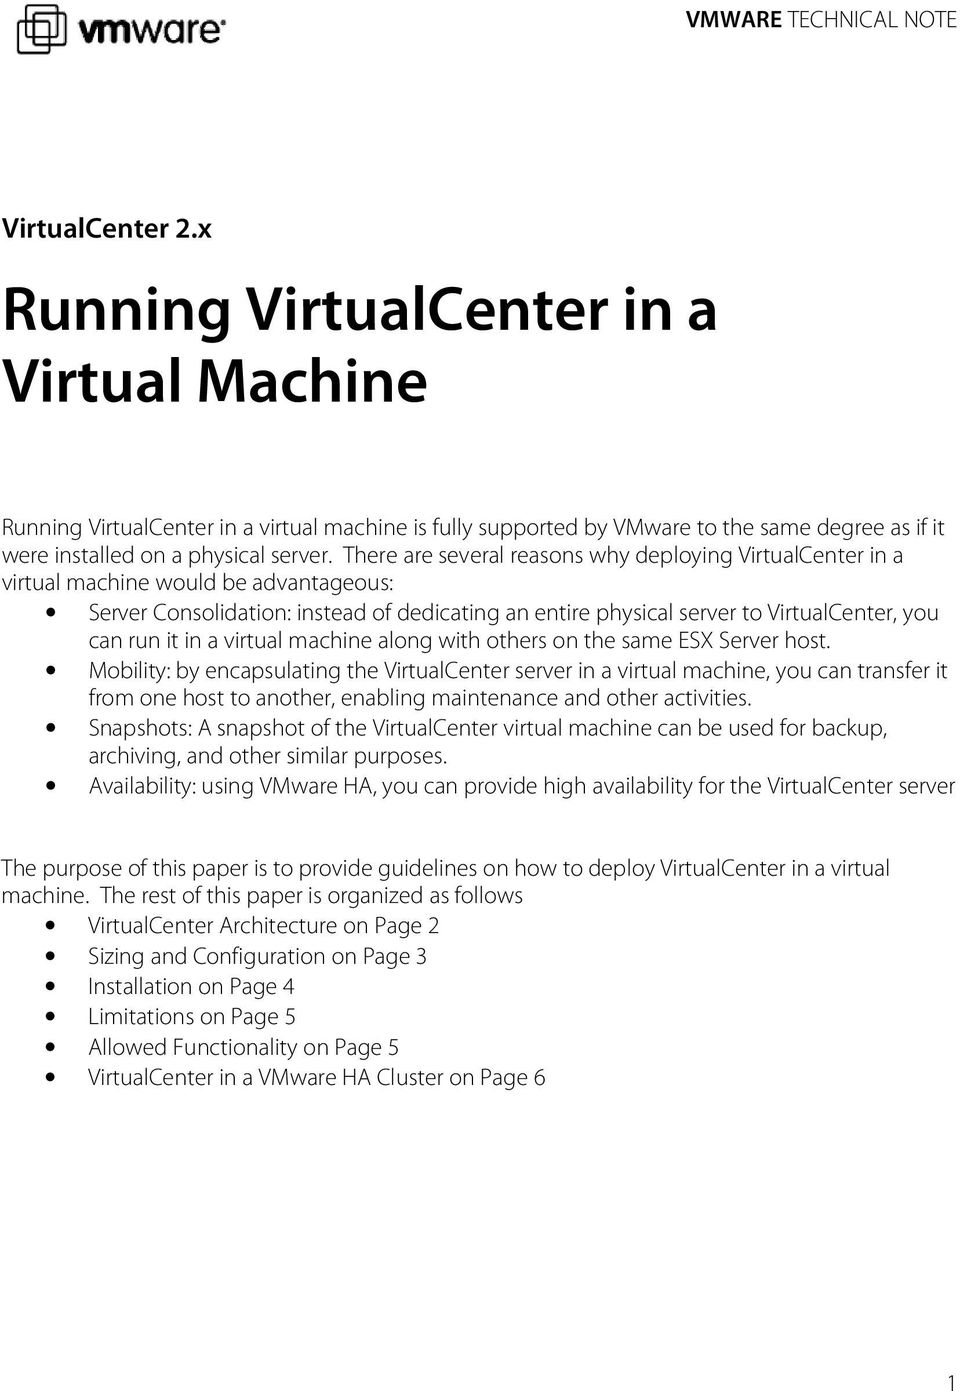 There are several reasons why deploying VirtualCenter in a virtual machine would be advantageous: Server Consolidation: instead of dedicating an entire physical server to VirtualCenter, you can run